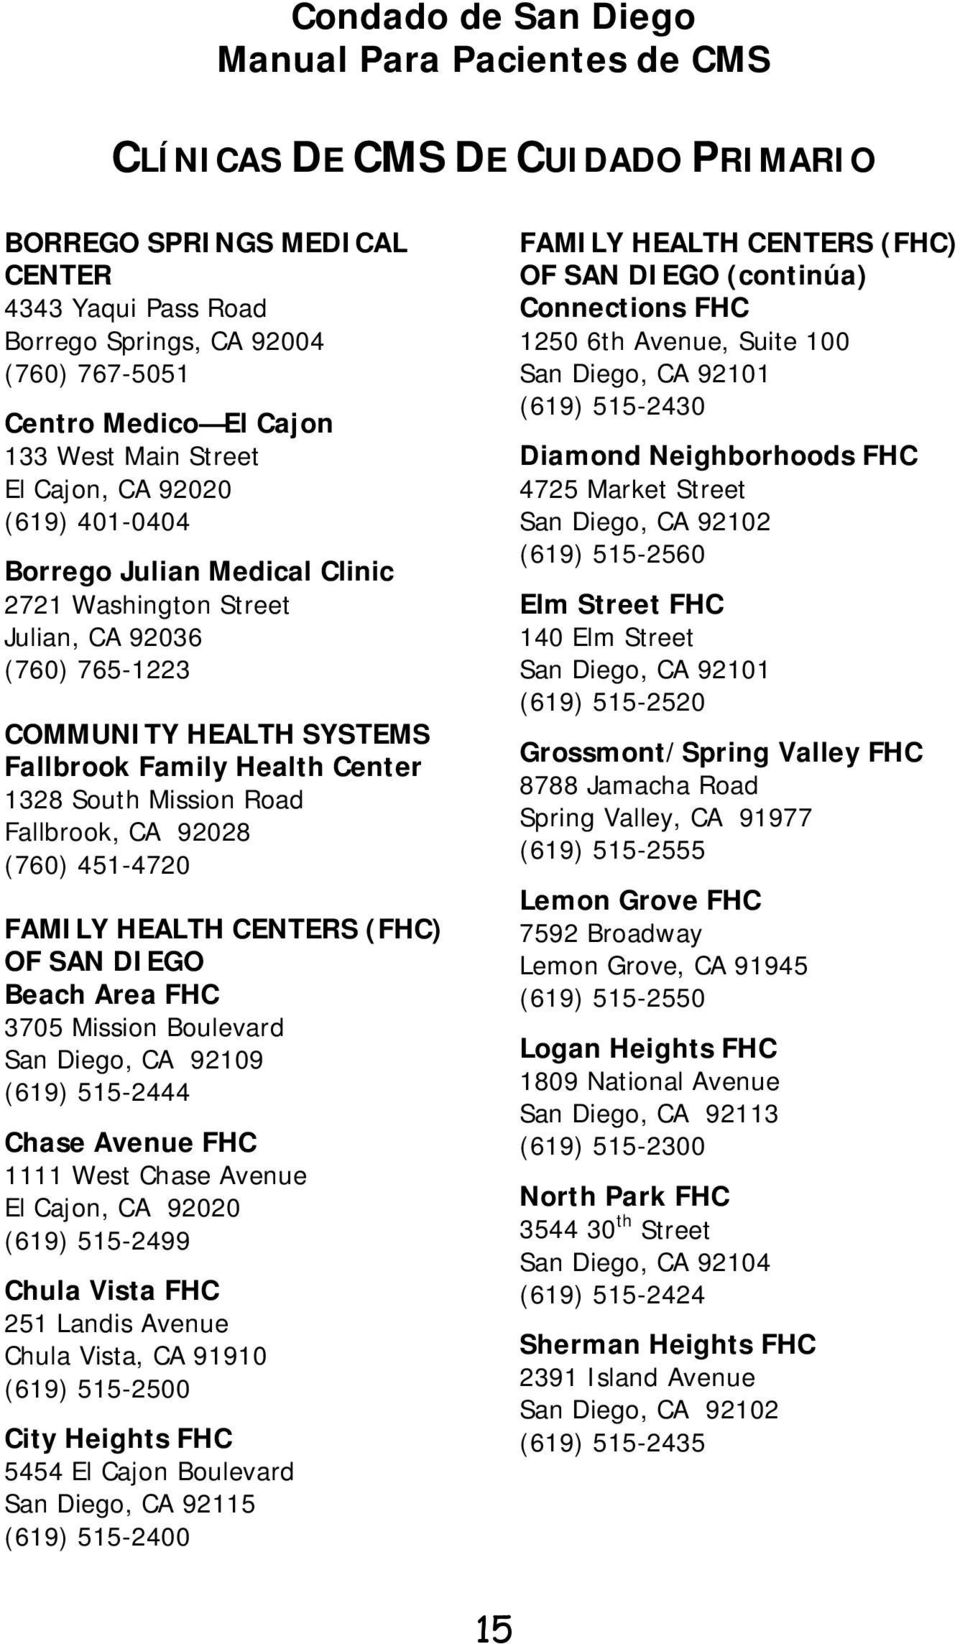 Mission Road Fallbrook, CA 92028 (760) 451-4720 FAMILY HEALTH CENTERS (FHC) OF SAN DIEGO Beach Area FHC 3705 Mission Boulevard San Diego, CA 92109 (619) 515-2444 Chase Avenue FHC 1111 West Chase